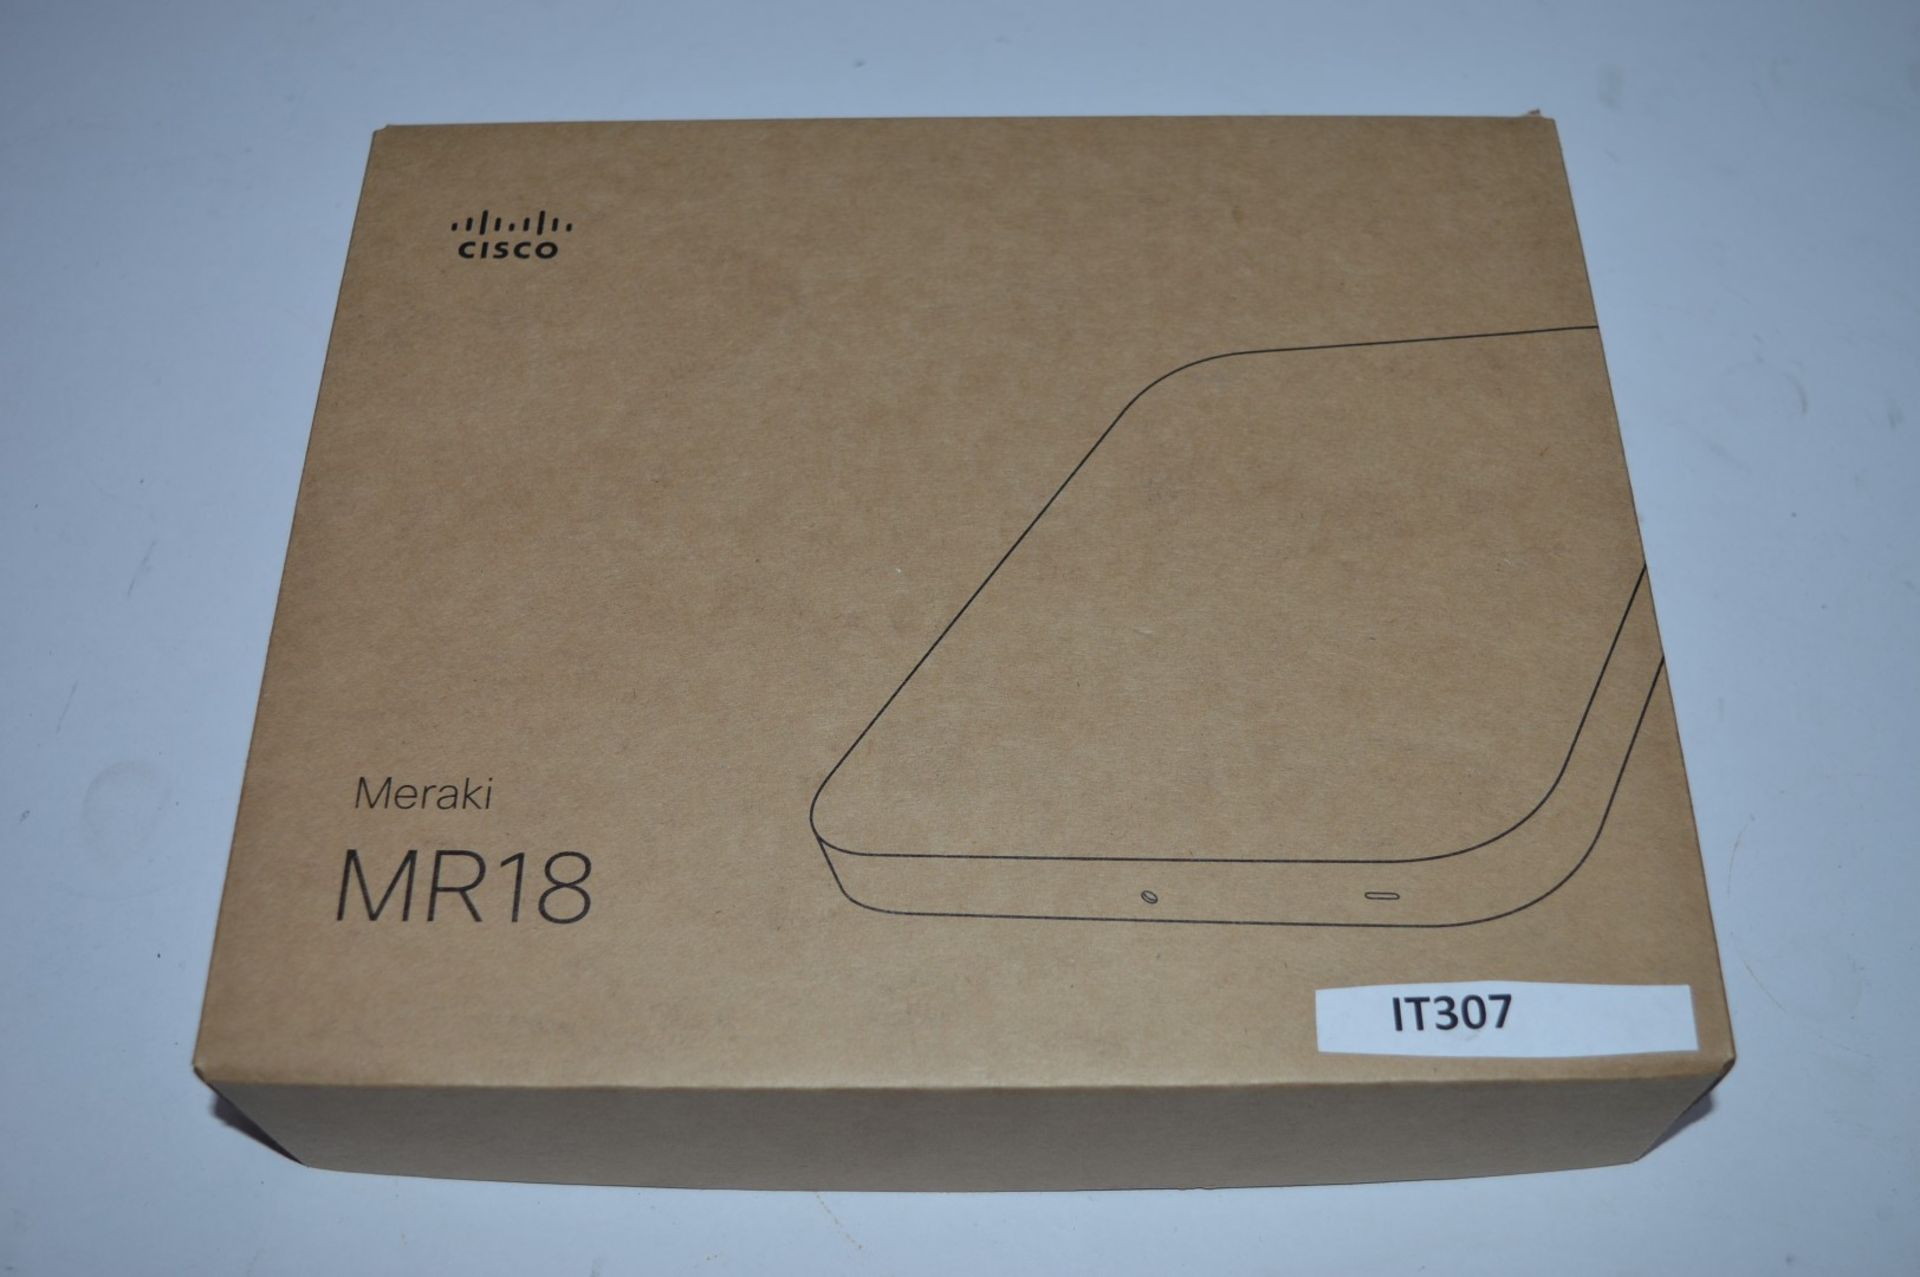 1 x Cisco Meraki Mr18 Dual Band Wireless Cloud Network Access Point - Boxed - CL400 - Ref IT307 - - Image 2 of 4